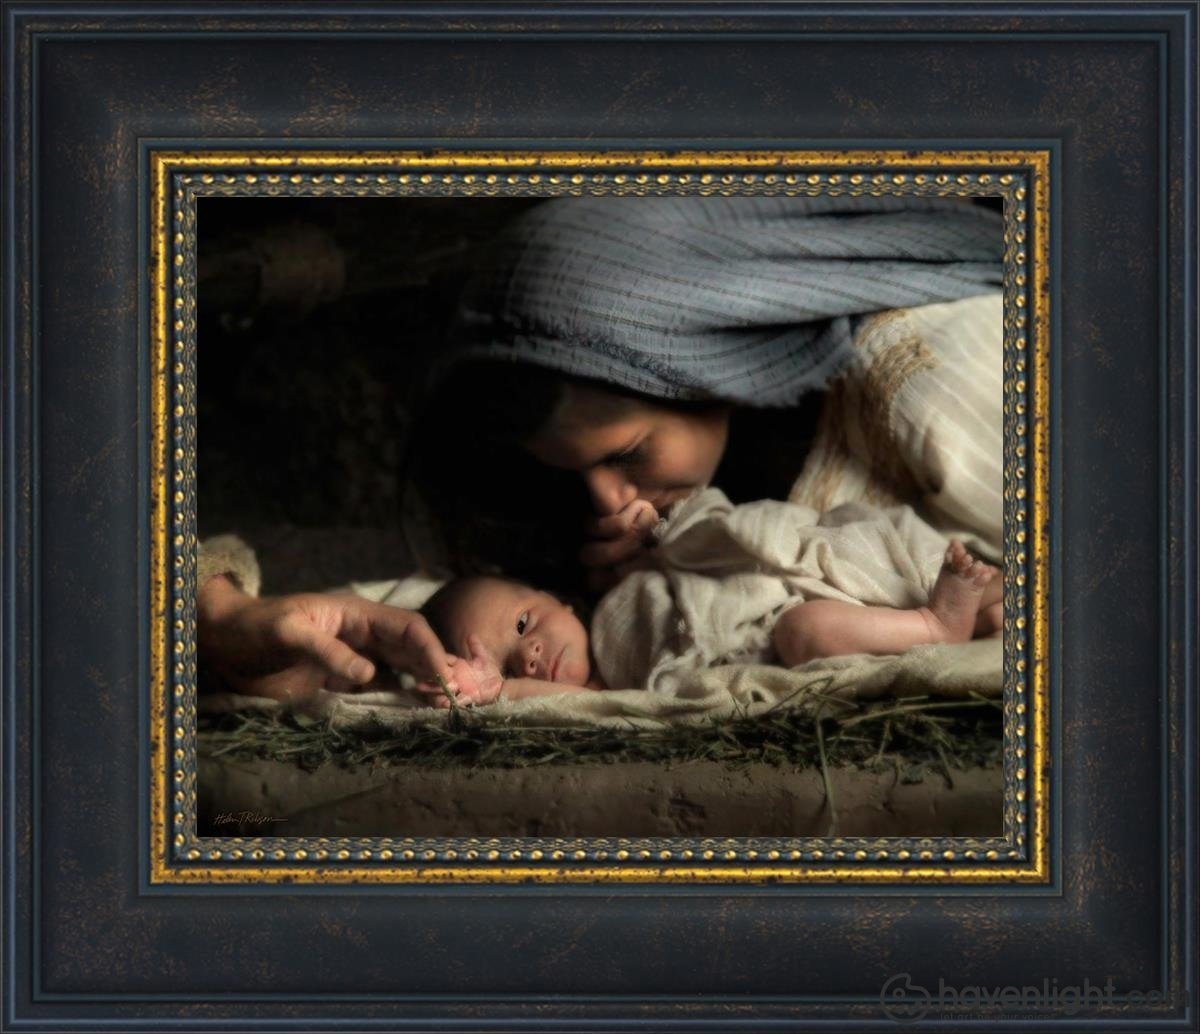 His Hands Open Edition Print / 10 X 8 Frame W 14 1/2 12 Art